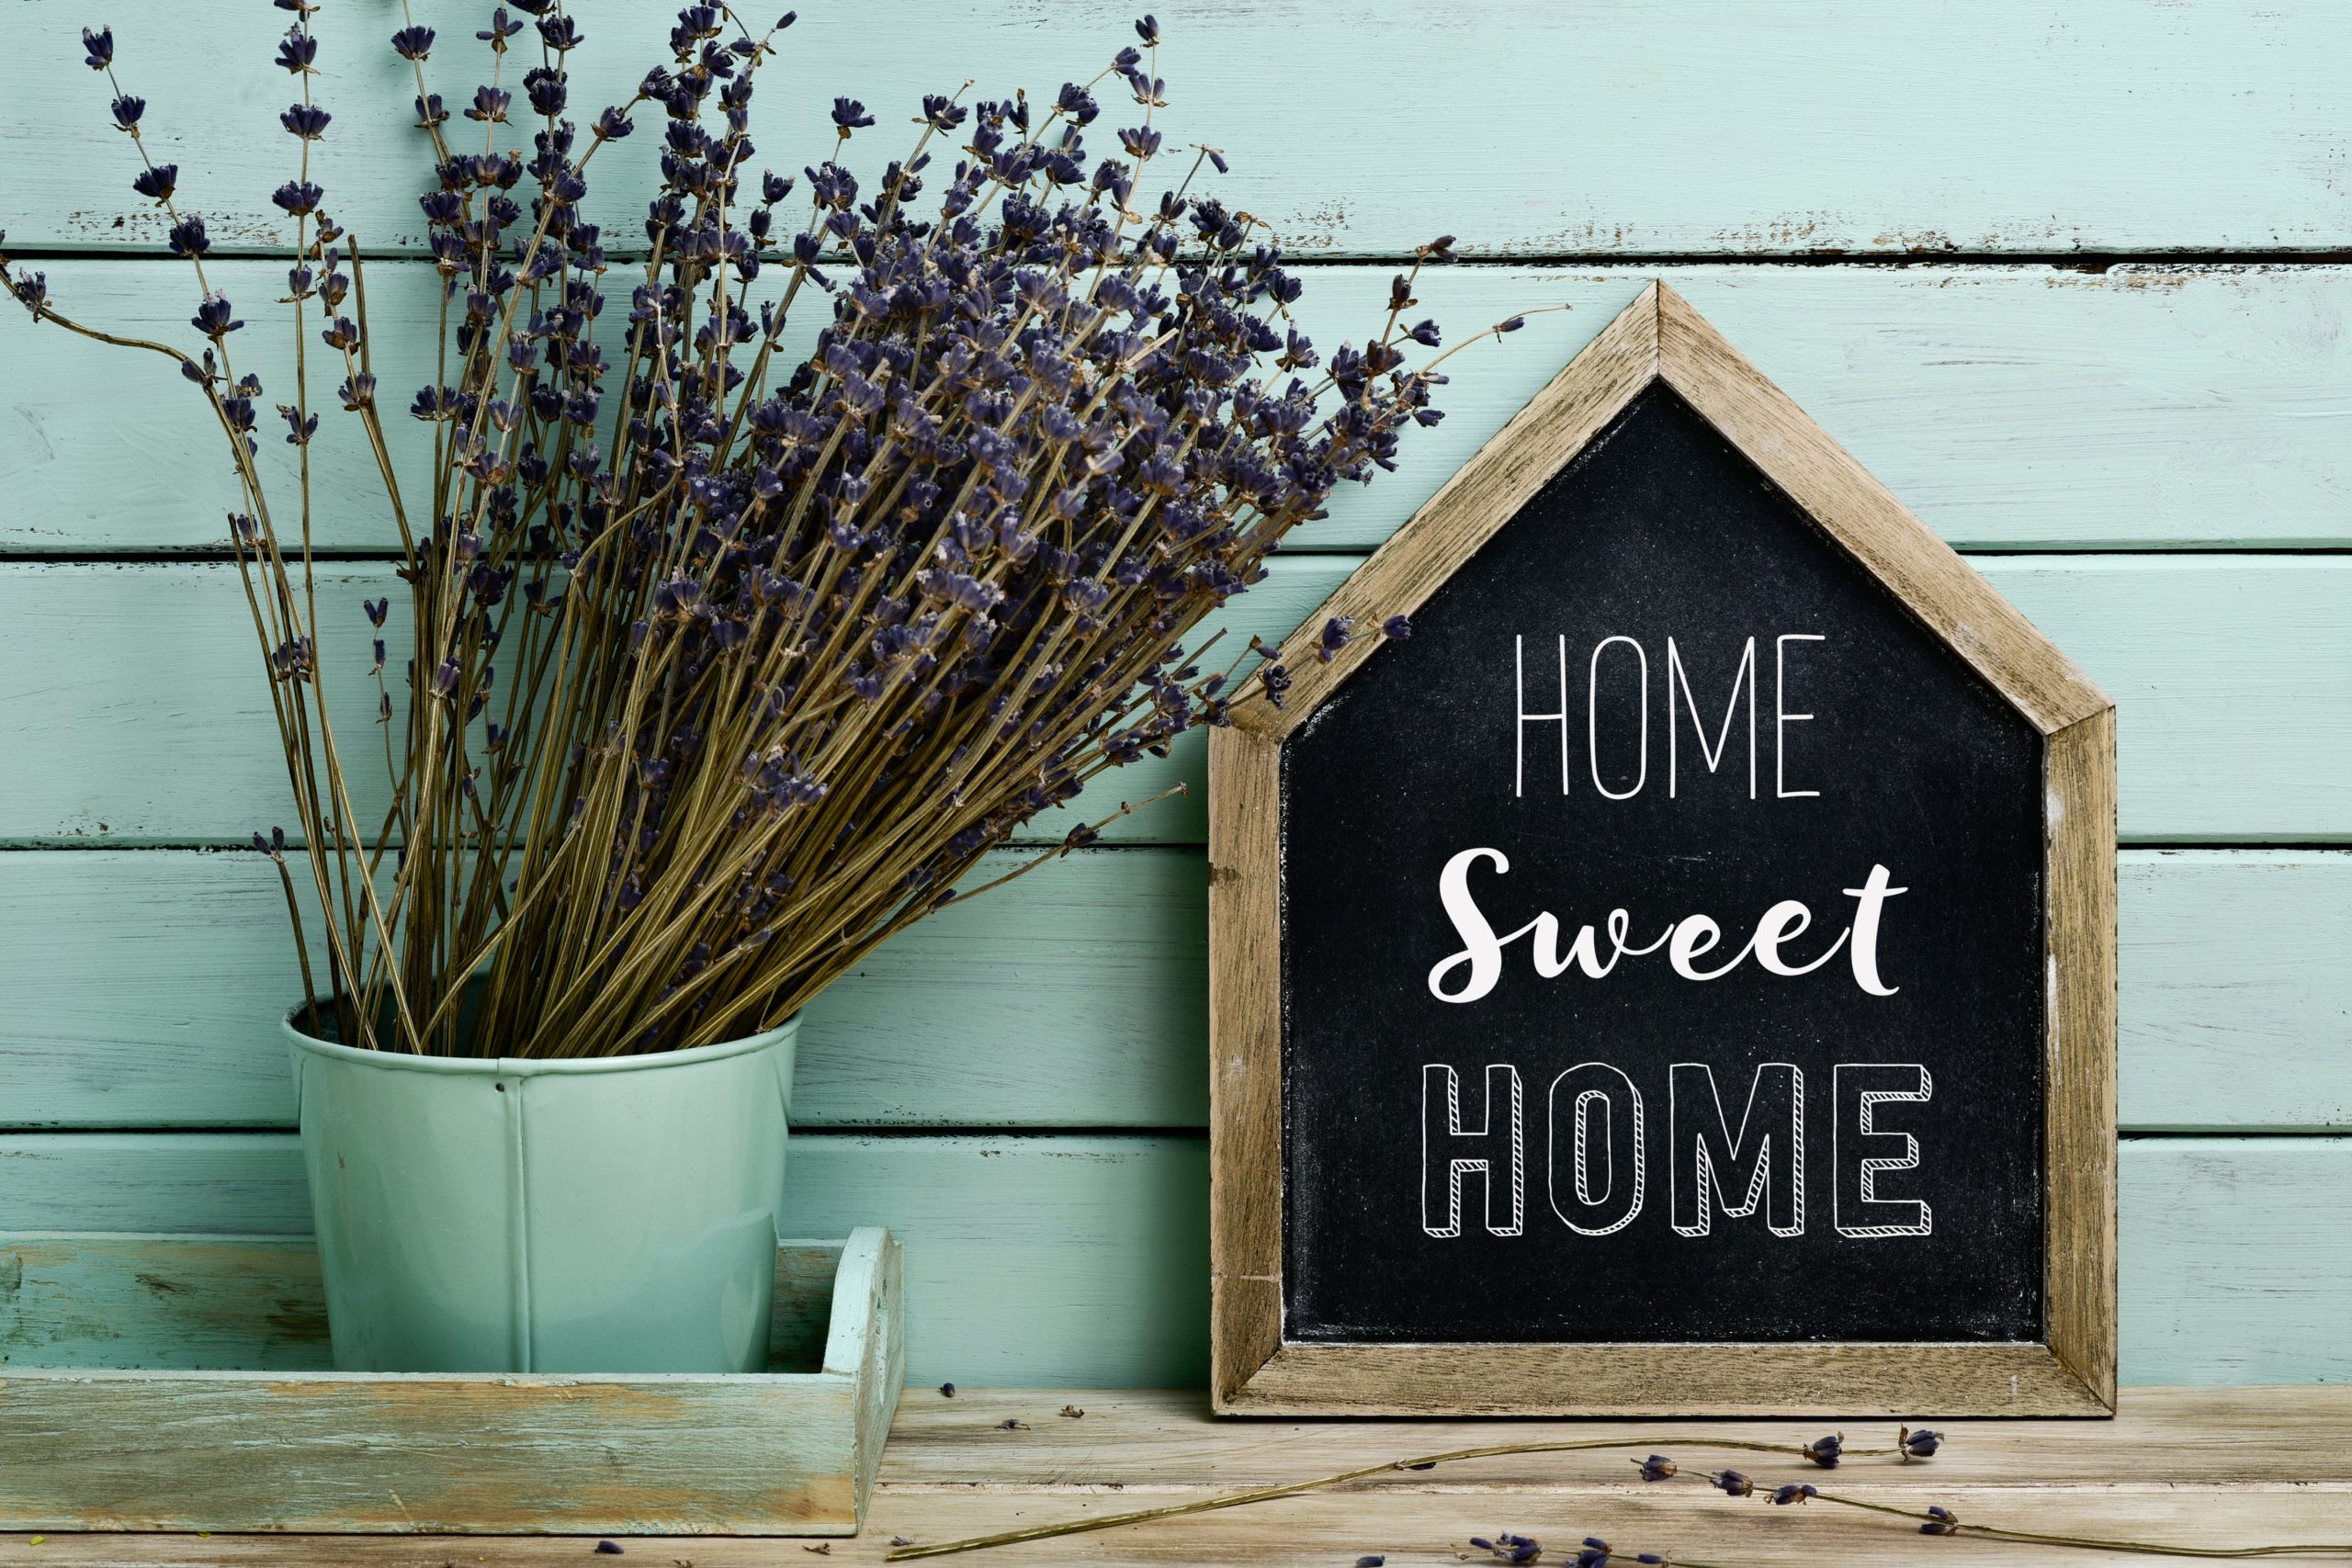 text home sweet home in a house-shaped signboard